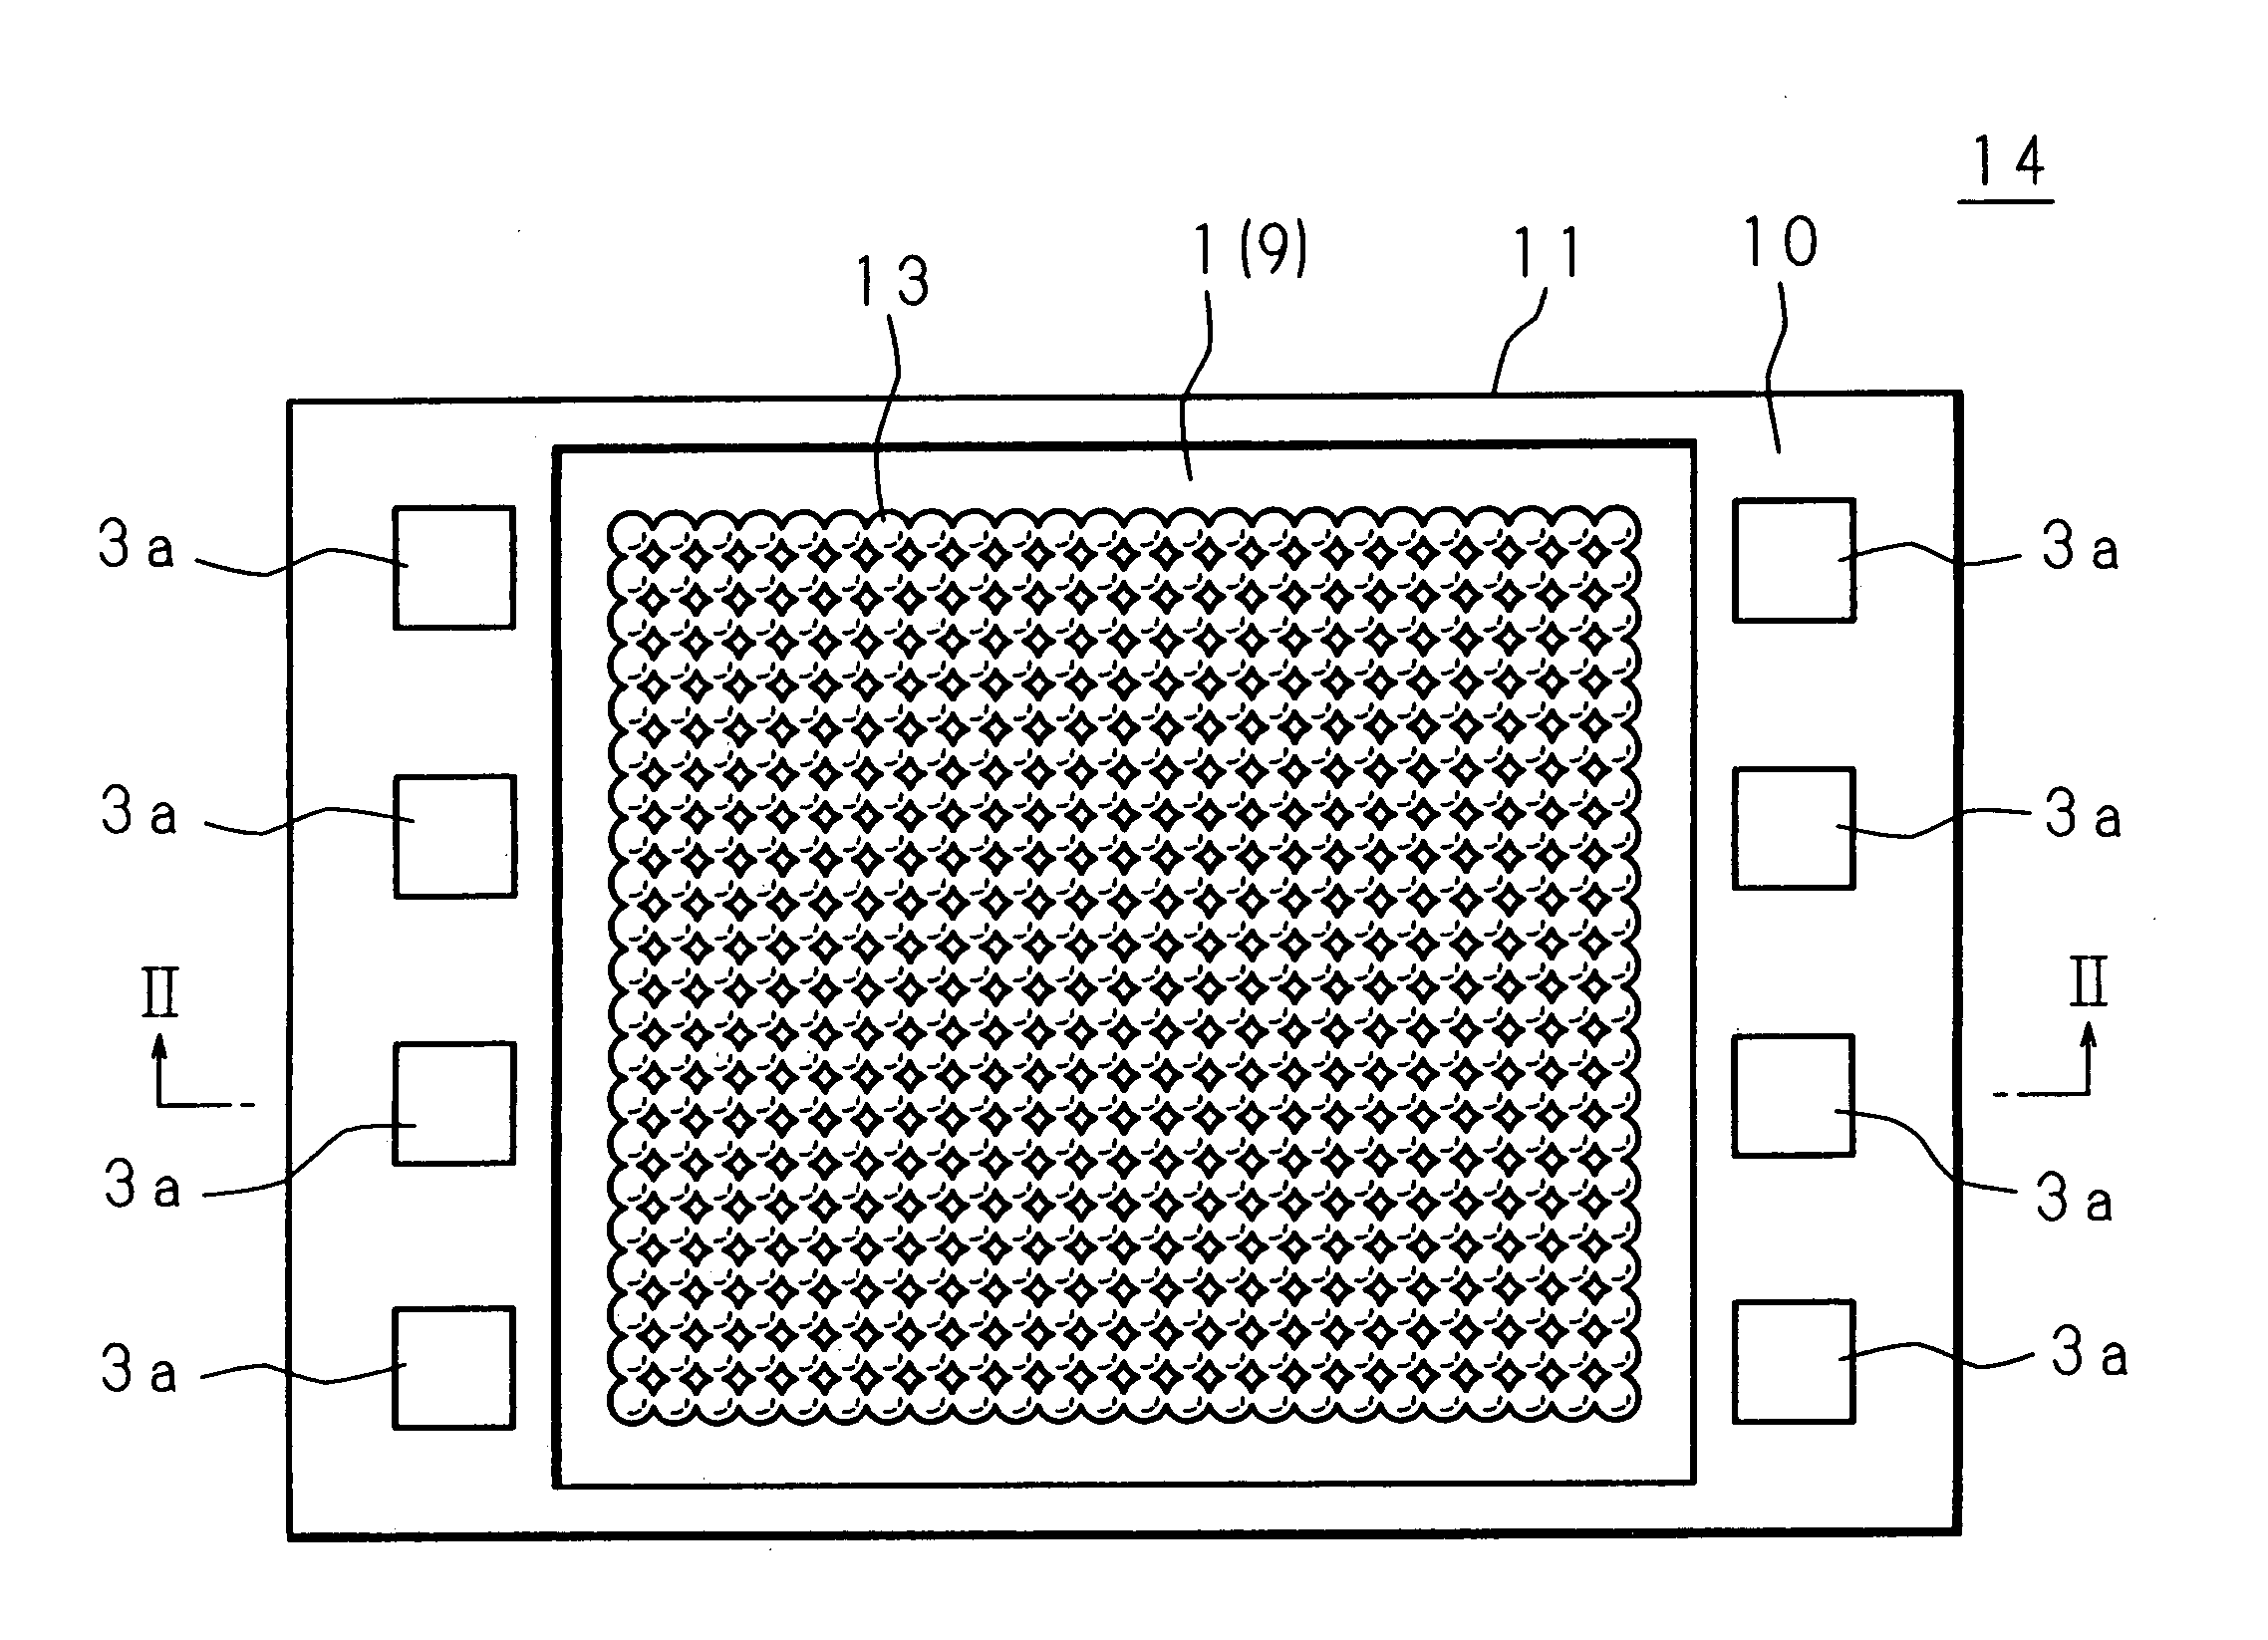 Semiconductor device, module for optical devices, and manufacturing method of semiconductor device